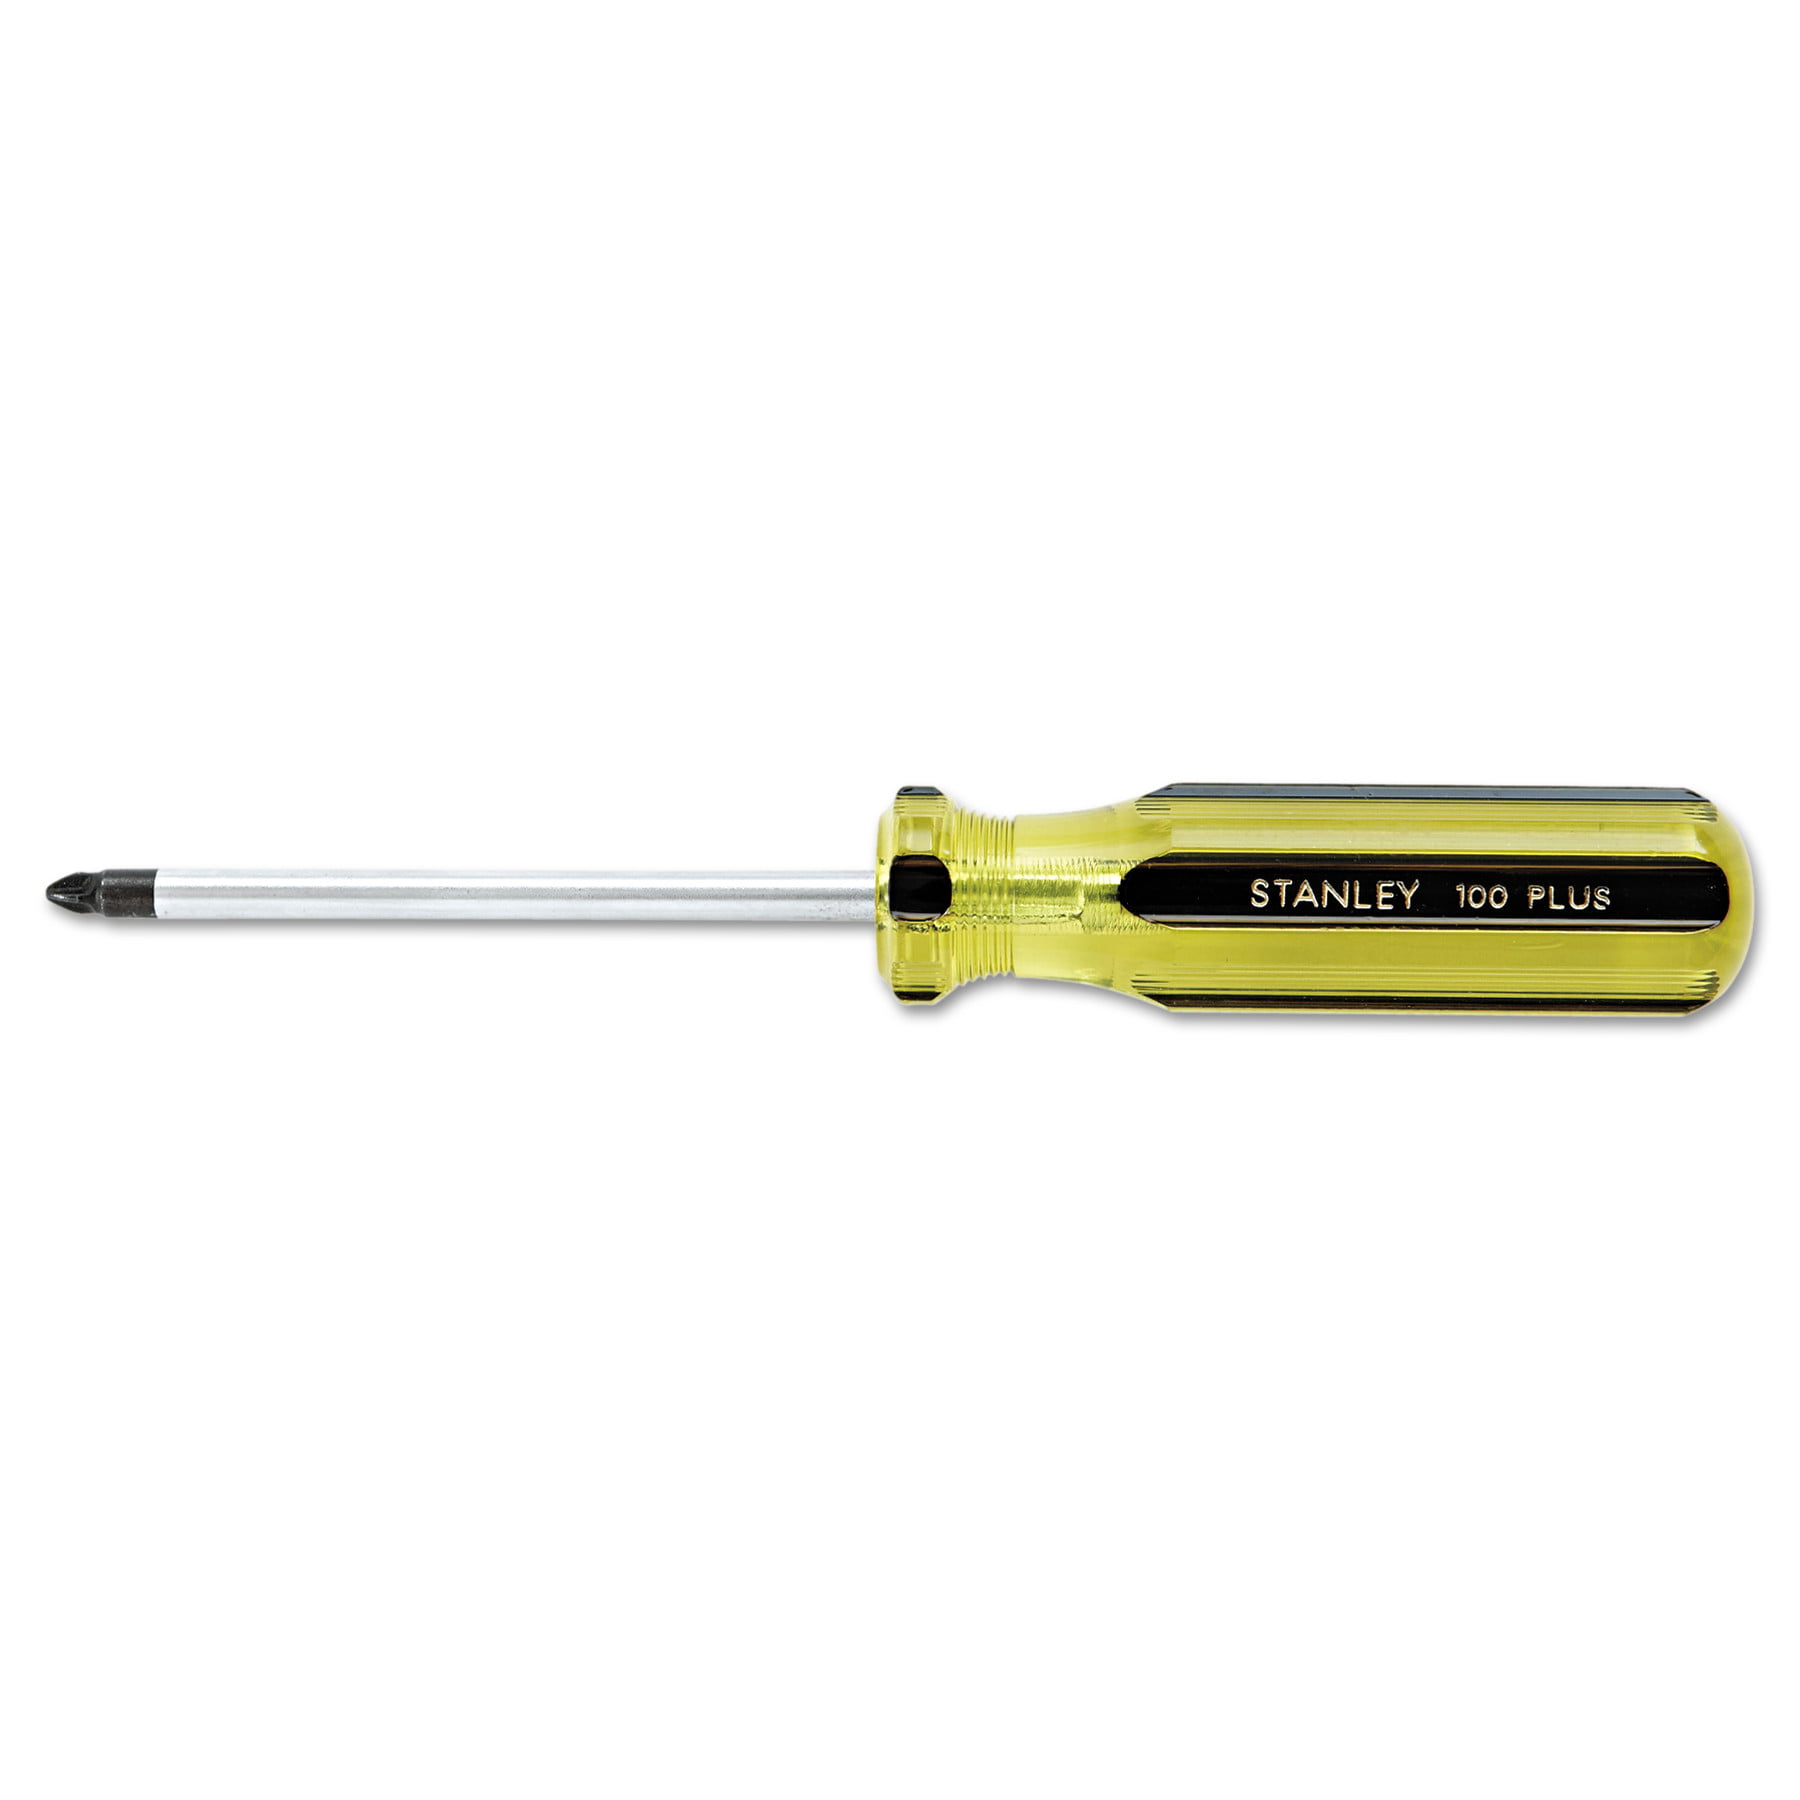 Stanley 66-011 100 Plus Standard Slotted Tip Screwdriver 1/4 Inch X 6 Inch 